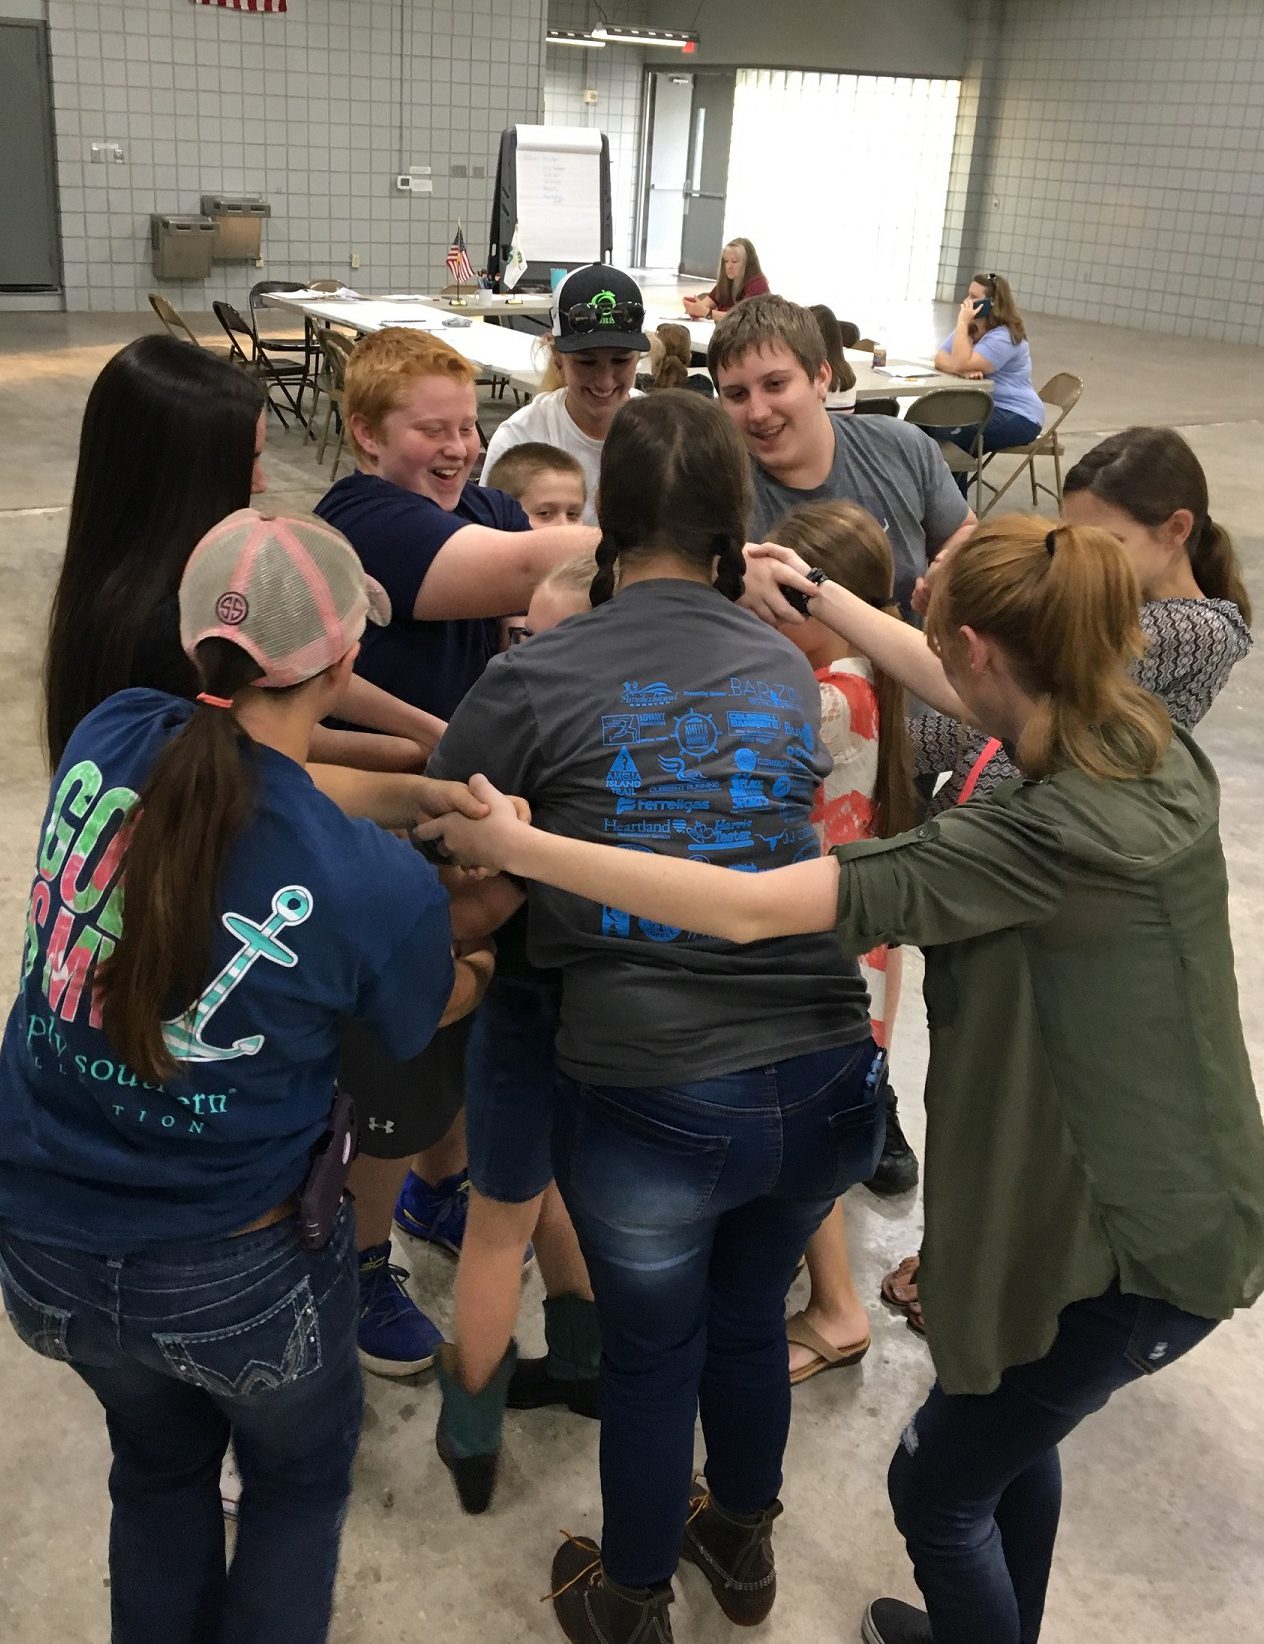 Participating in team building activities - the human knot!